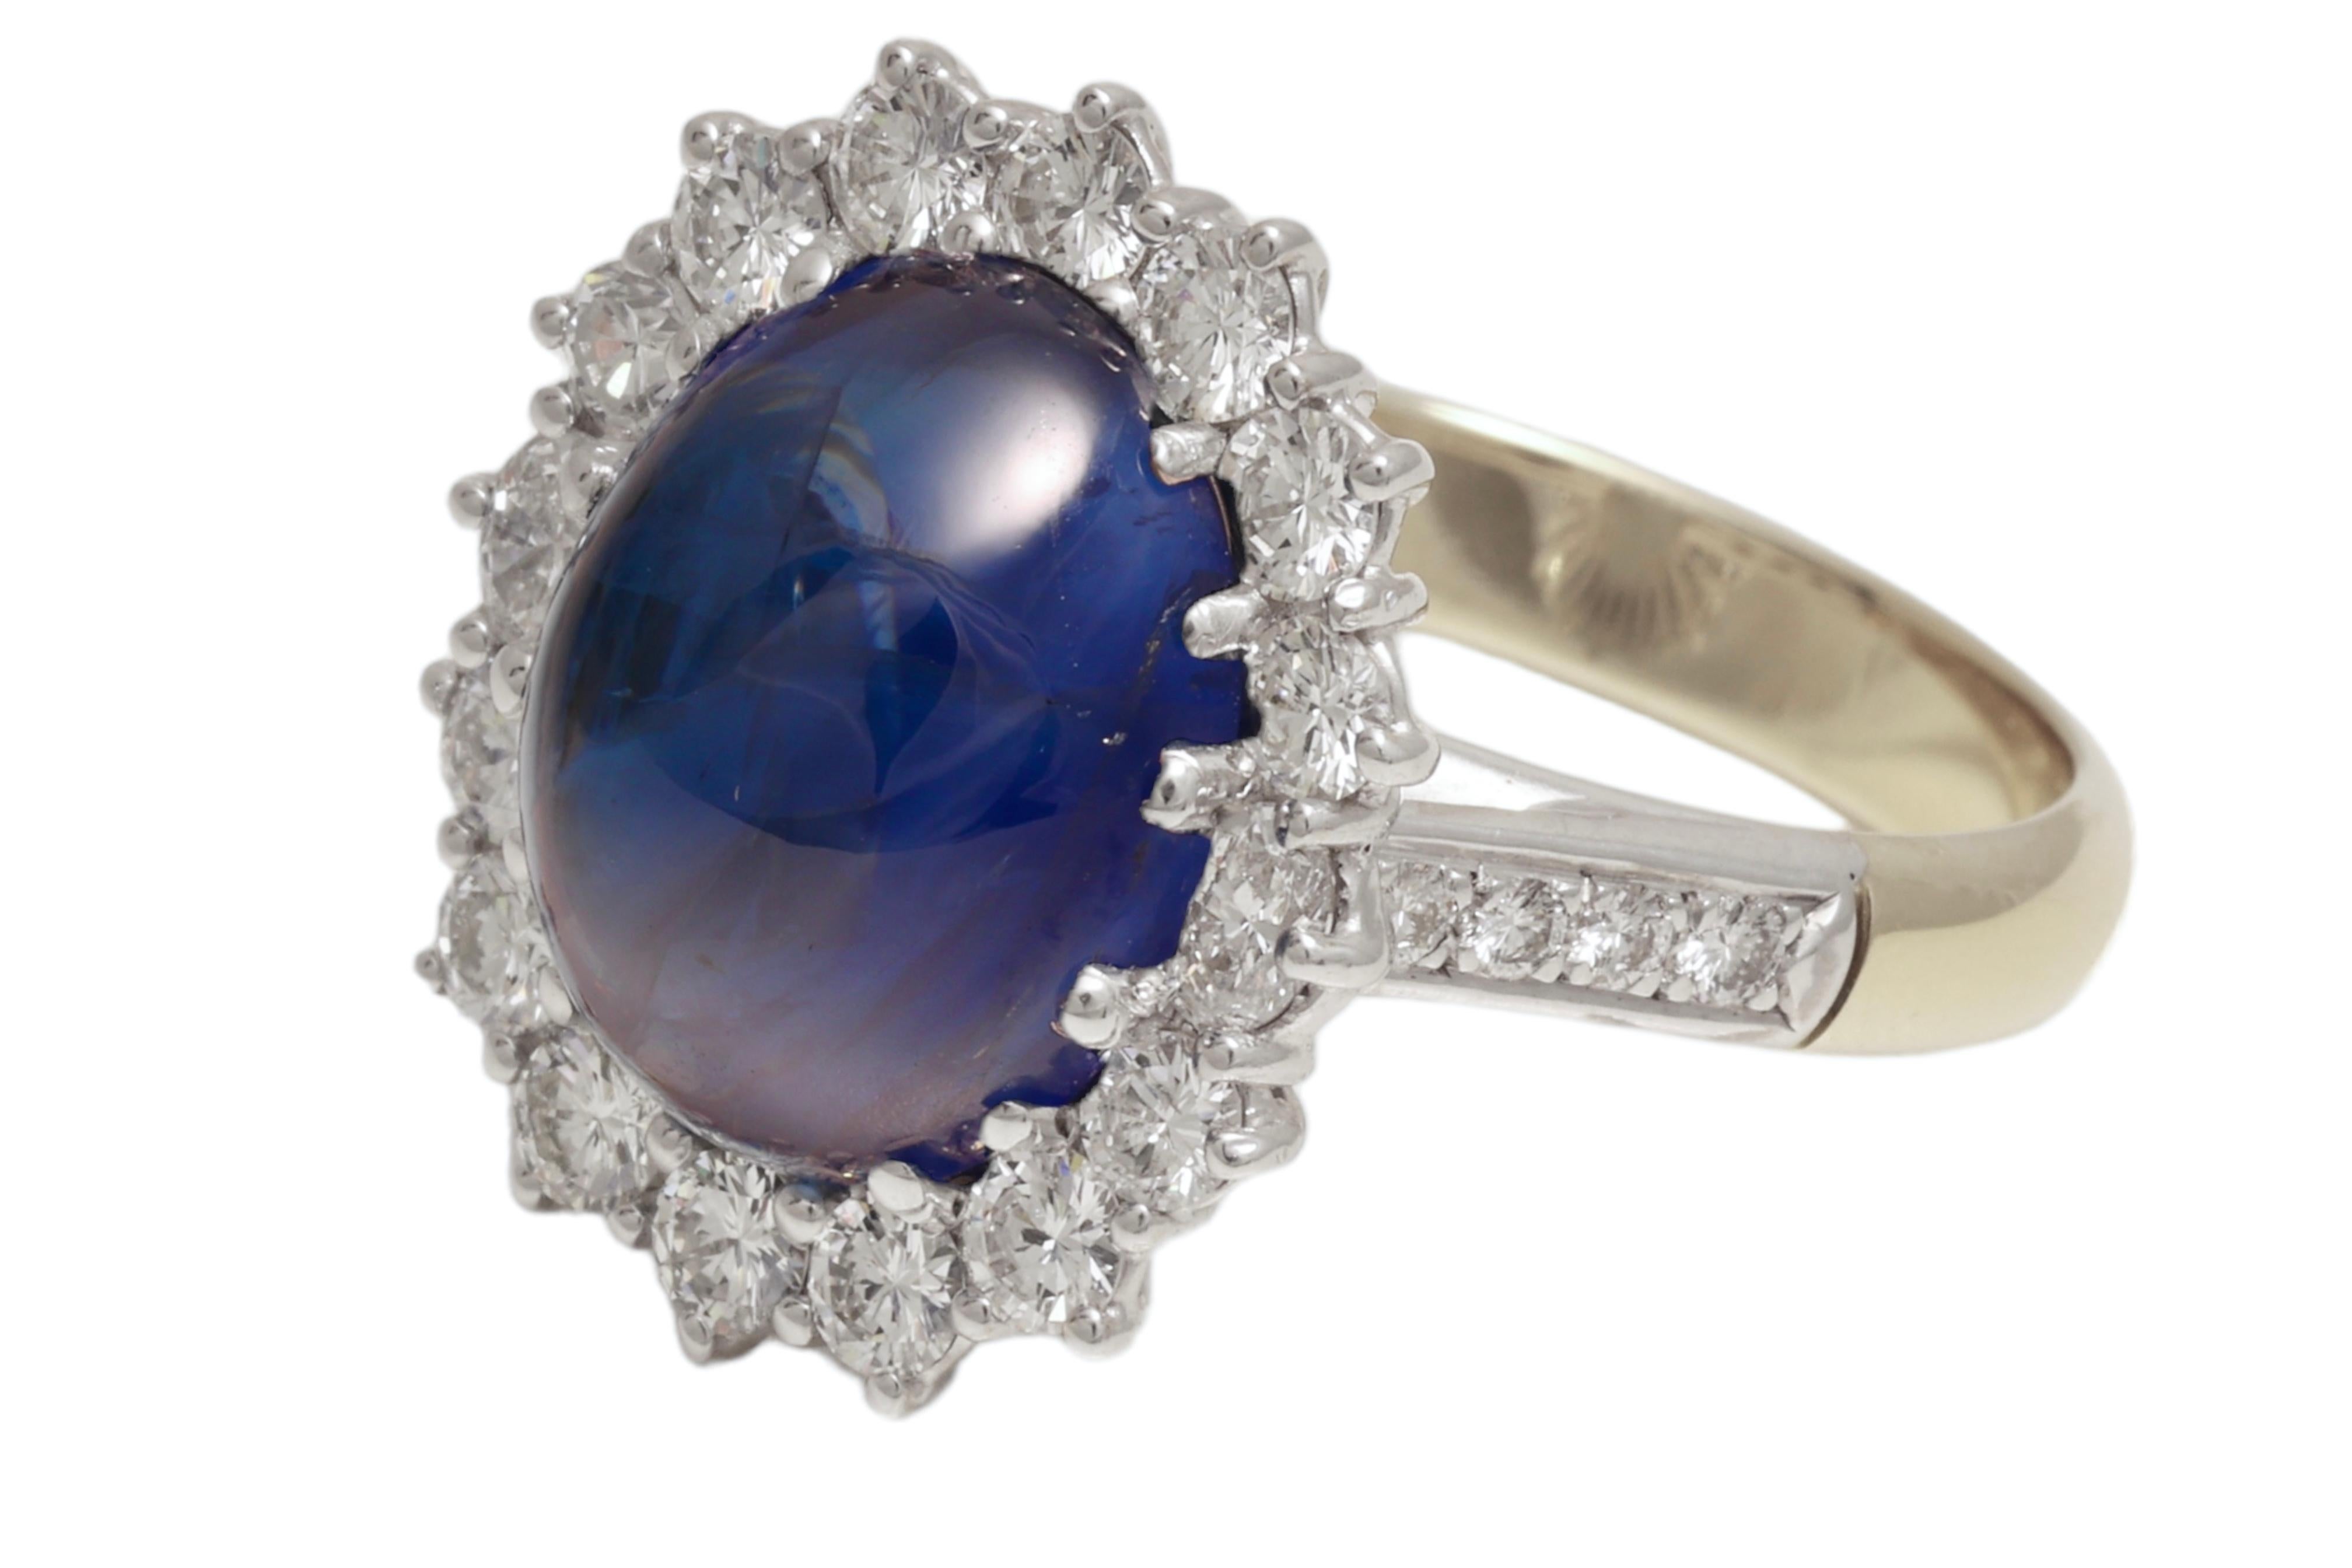 Gorgeous  18kt Yellow and White Gold Ring With a 9.93 Ct Ceylon Cabochon Sapphire & Diamonds 

Diamonds: Brilliant cut diamonds together approx. 1.80 ct. 

Sapphire: Intense blue, oval, Ceylon cabochon sapphire 9.93 ct. Comes with Carat Gem Lab